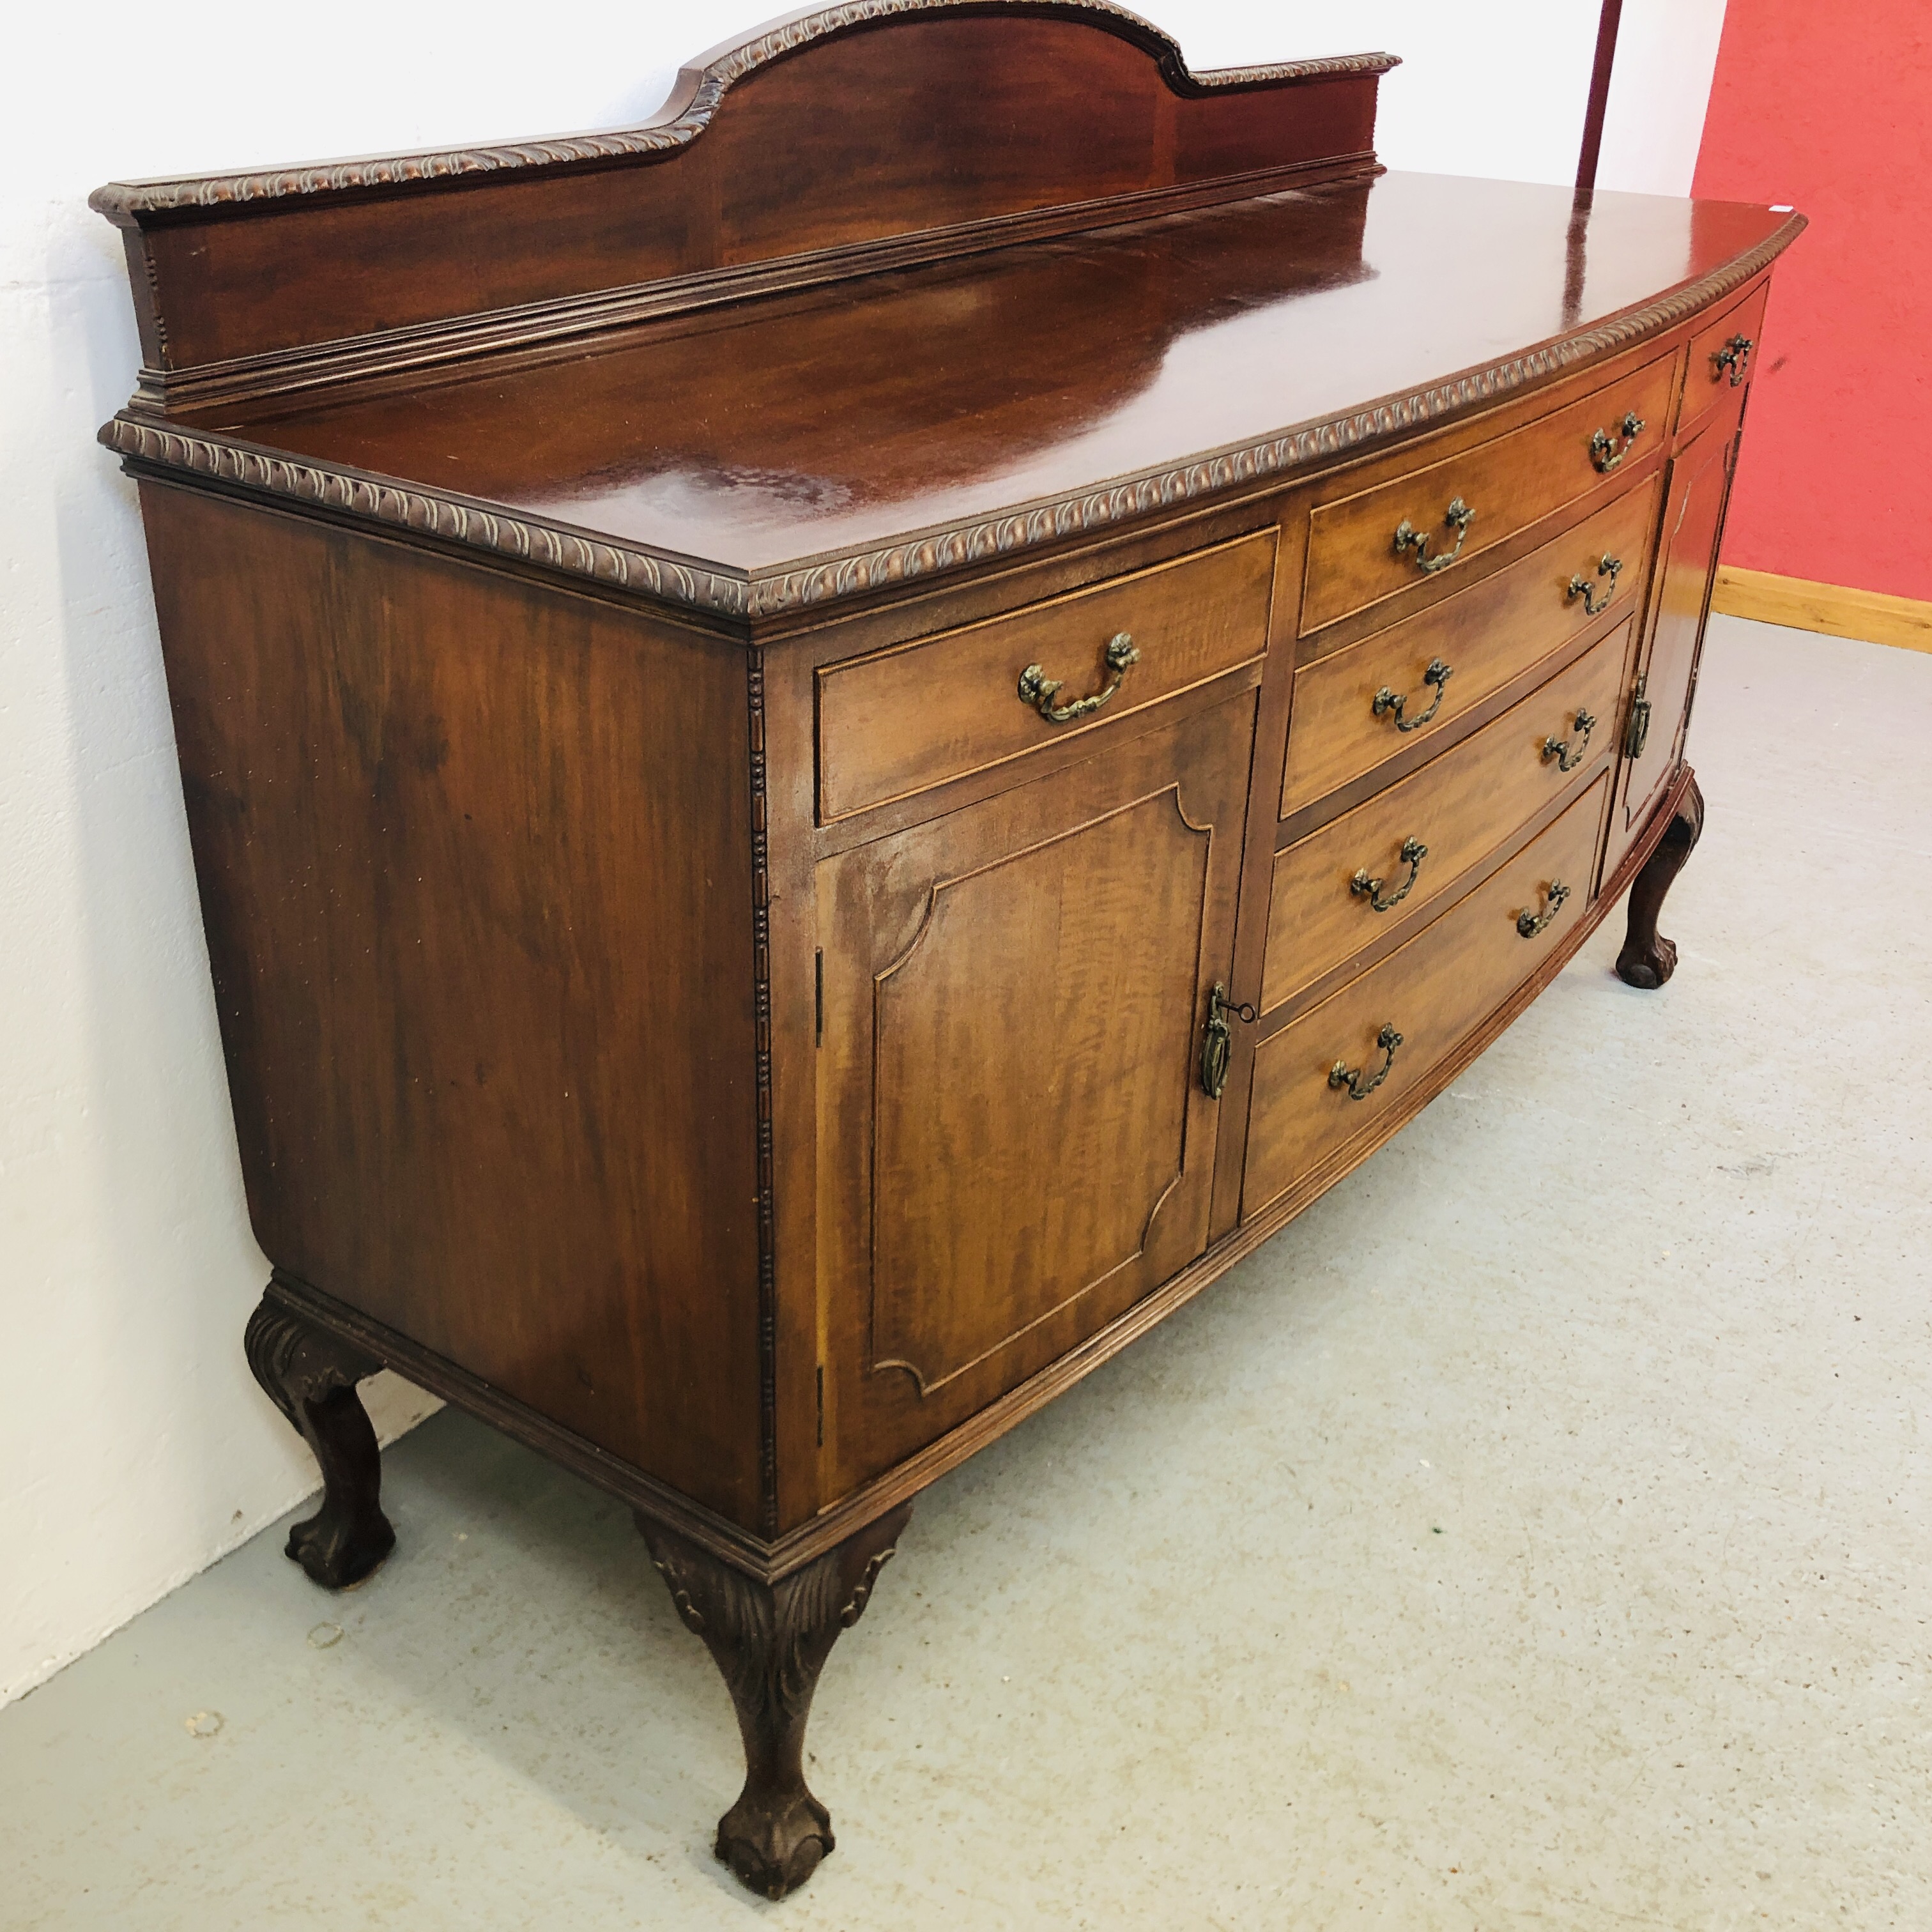 LARGE MAHOGANY BOW FRONT SIDEBOARD WITH FOUR CENTRAL DRAWERS FLANKED BY SINGLE DRAWERS AND CABINETS - Image 2 of 10